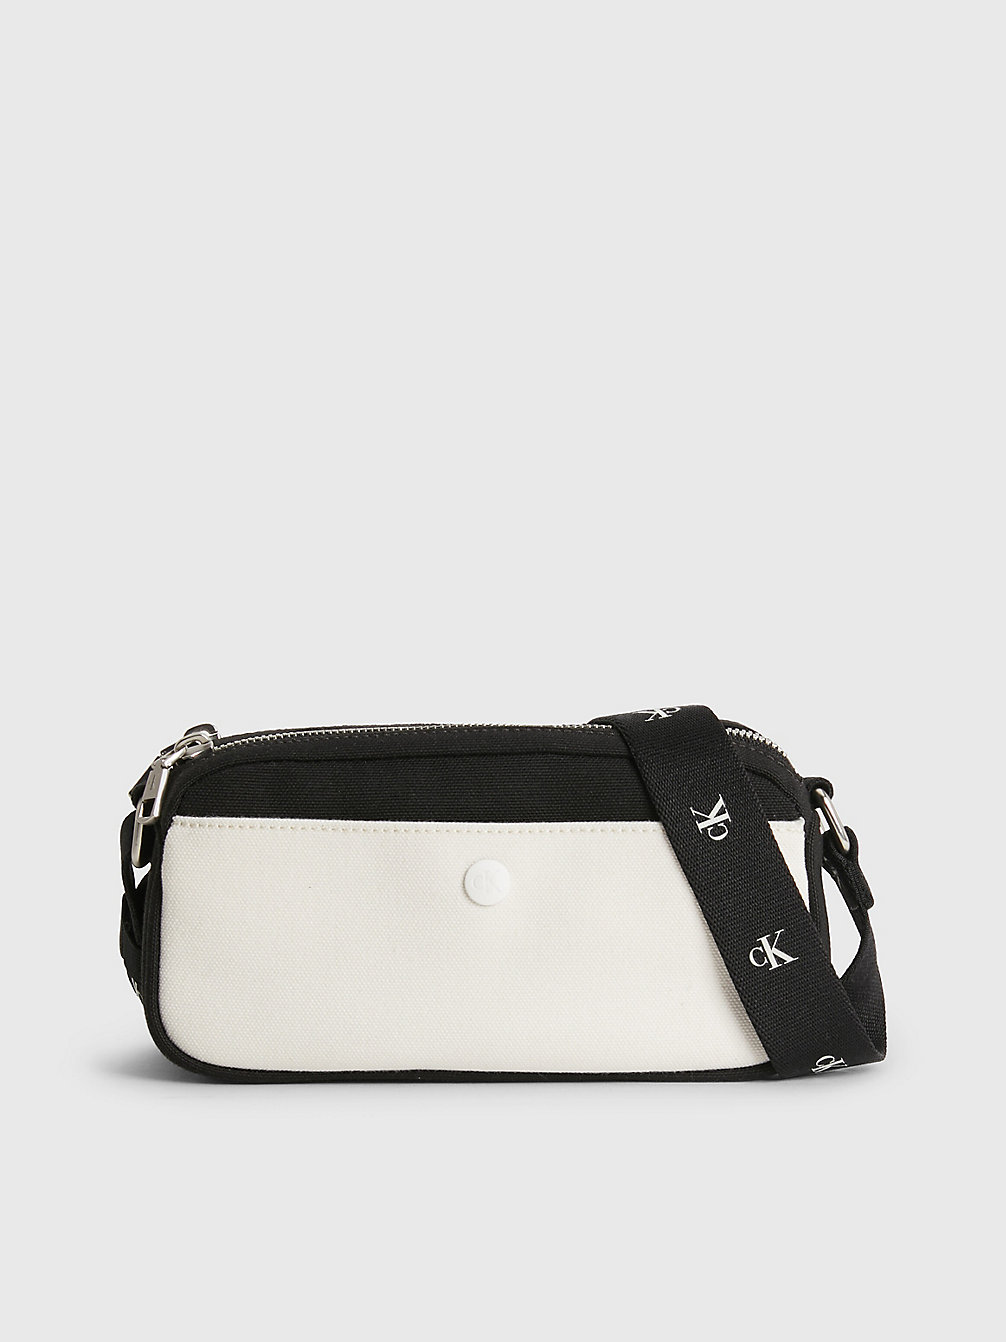 BLACK/ANCIENT WHITE Recycled Canvas Crossbody Bag undefined women Calvin Klein